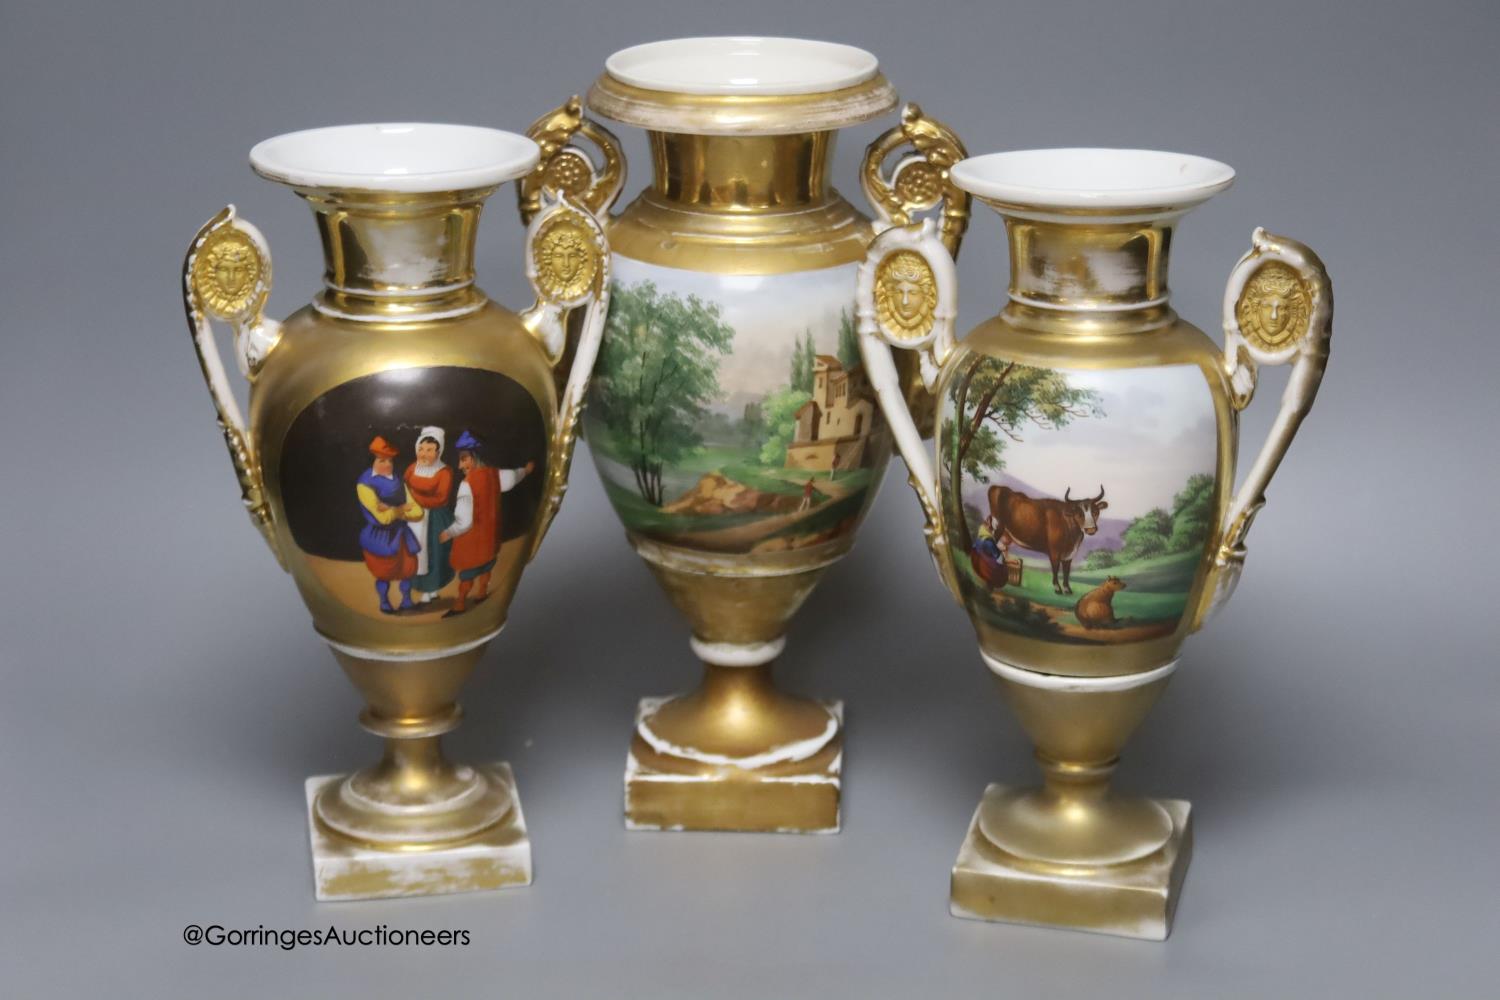 A 19th century French porcelain garniture of three vases, height 27cm - Image 2 of 4